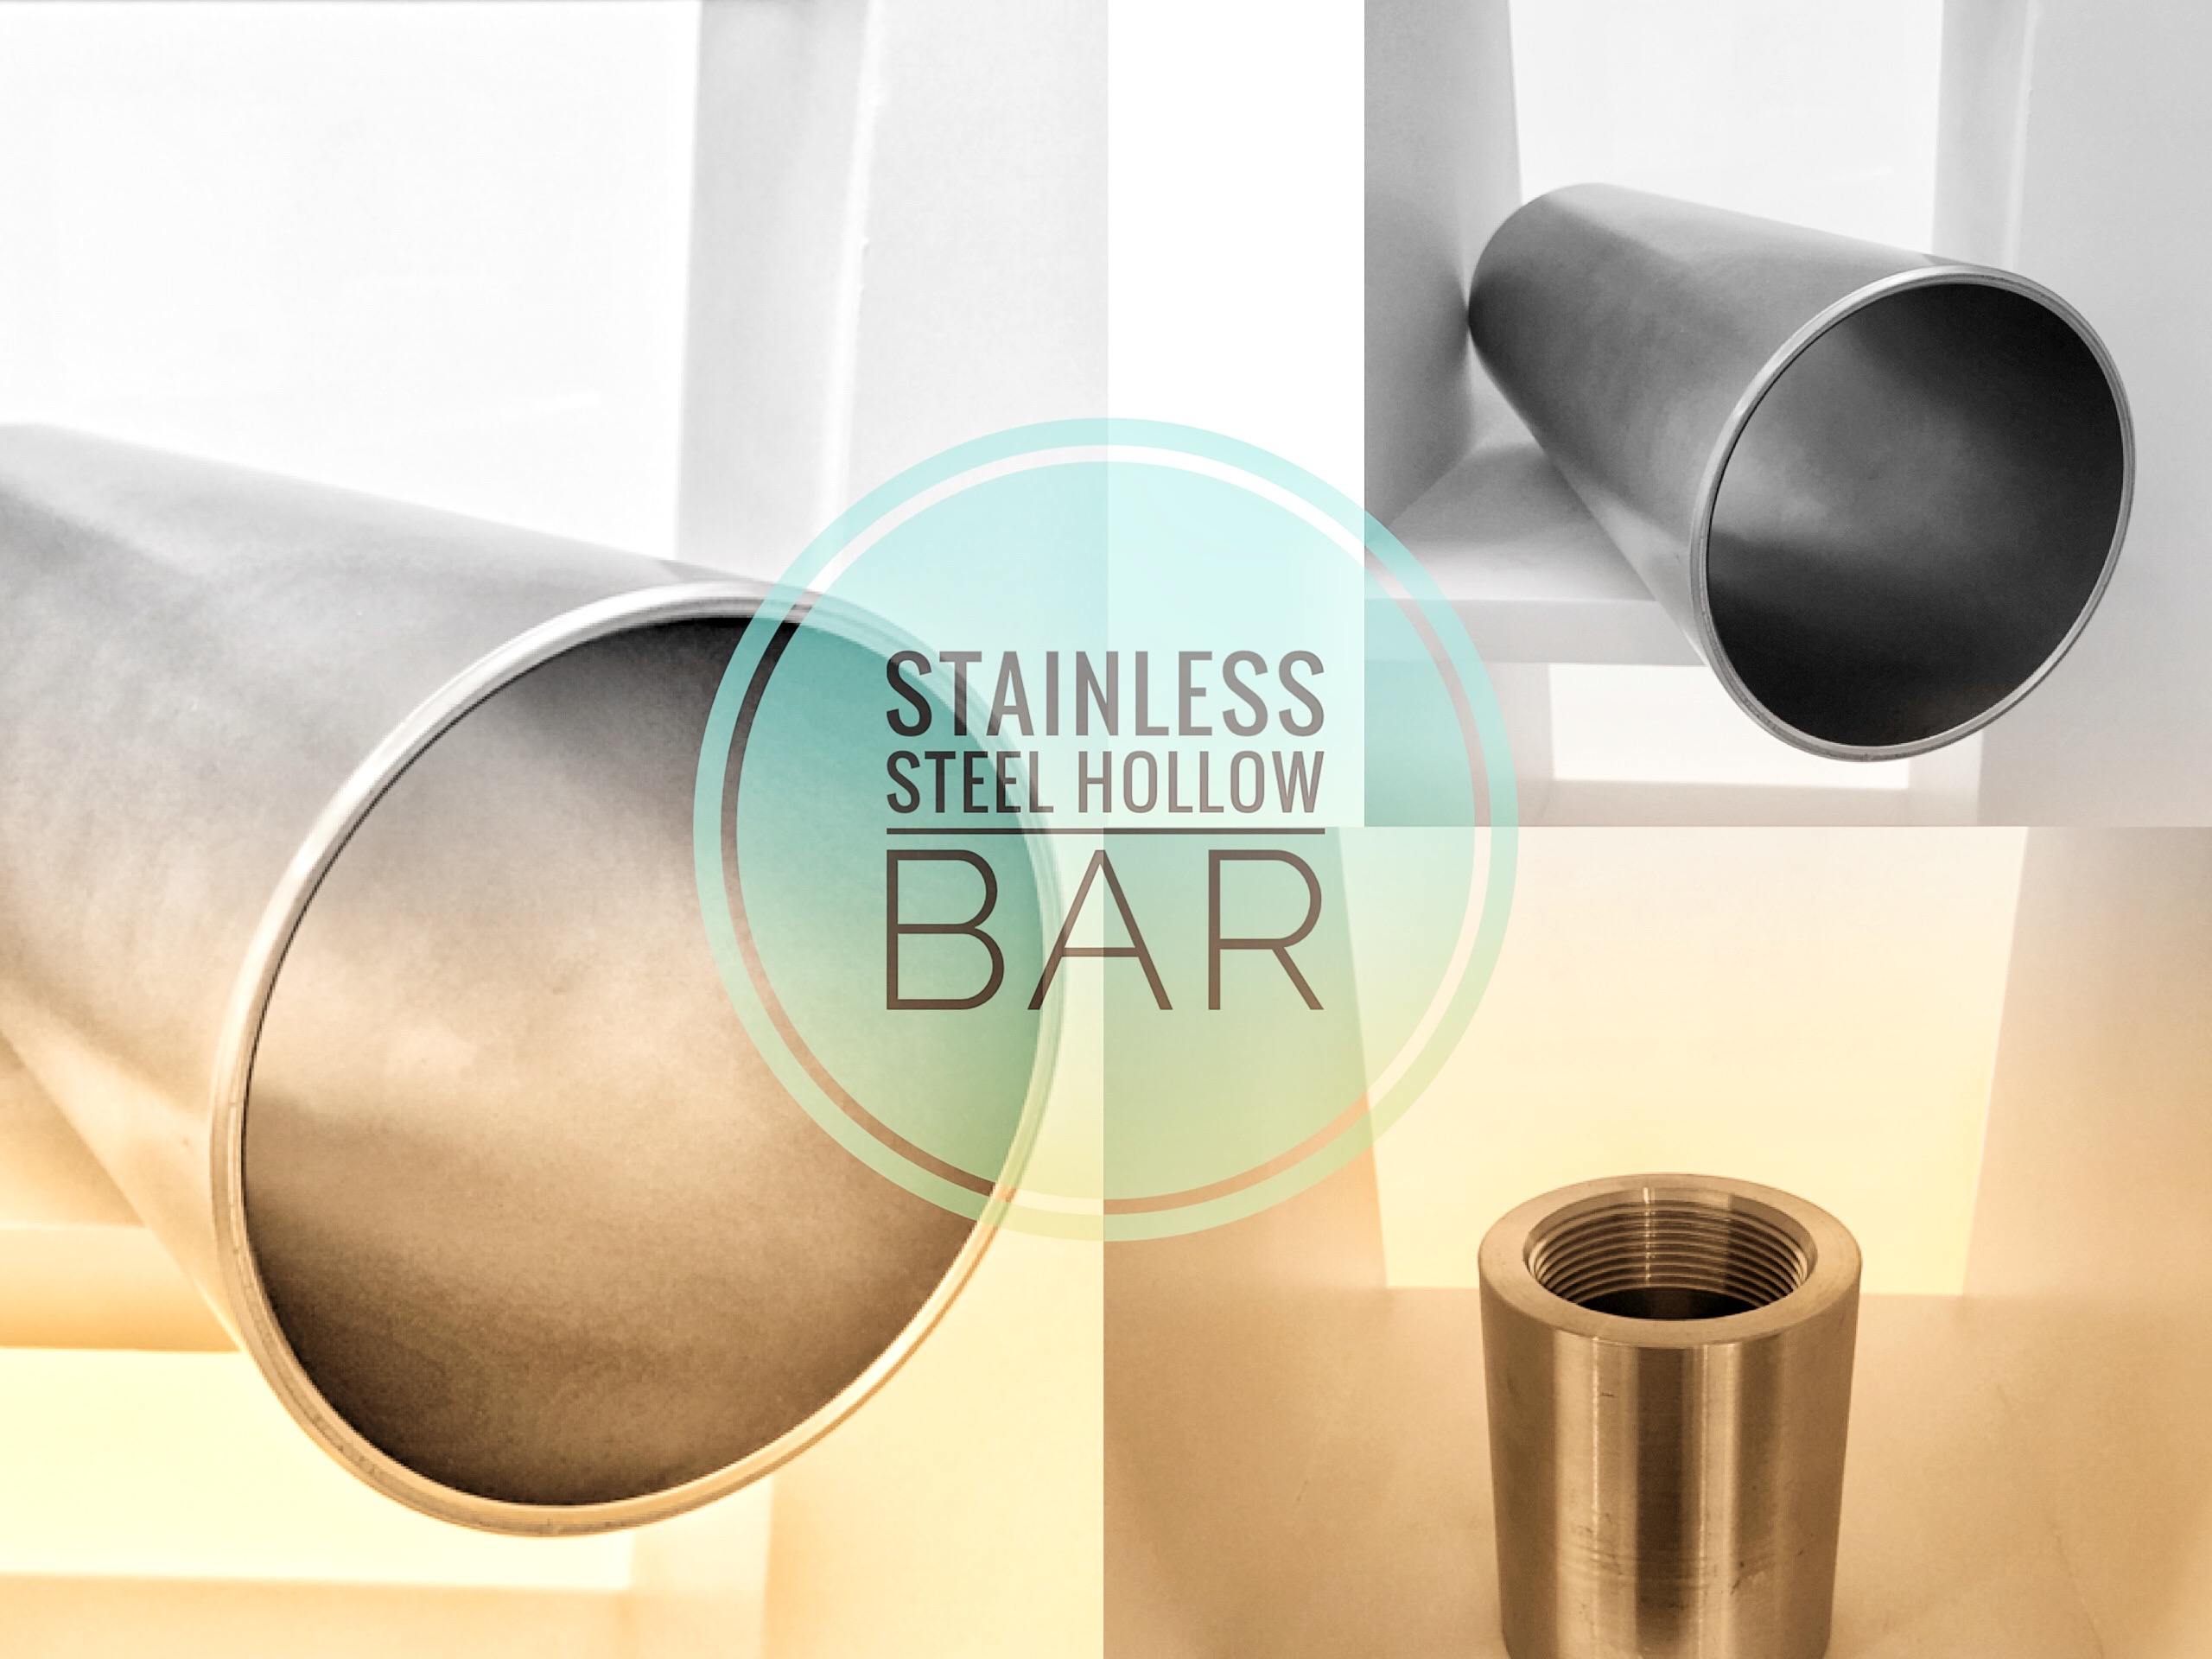 LAWAI is the pioneer of stainless steel hollow bar in Taiwan